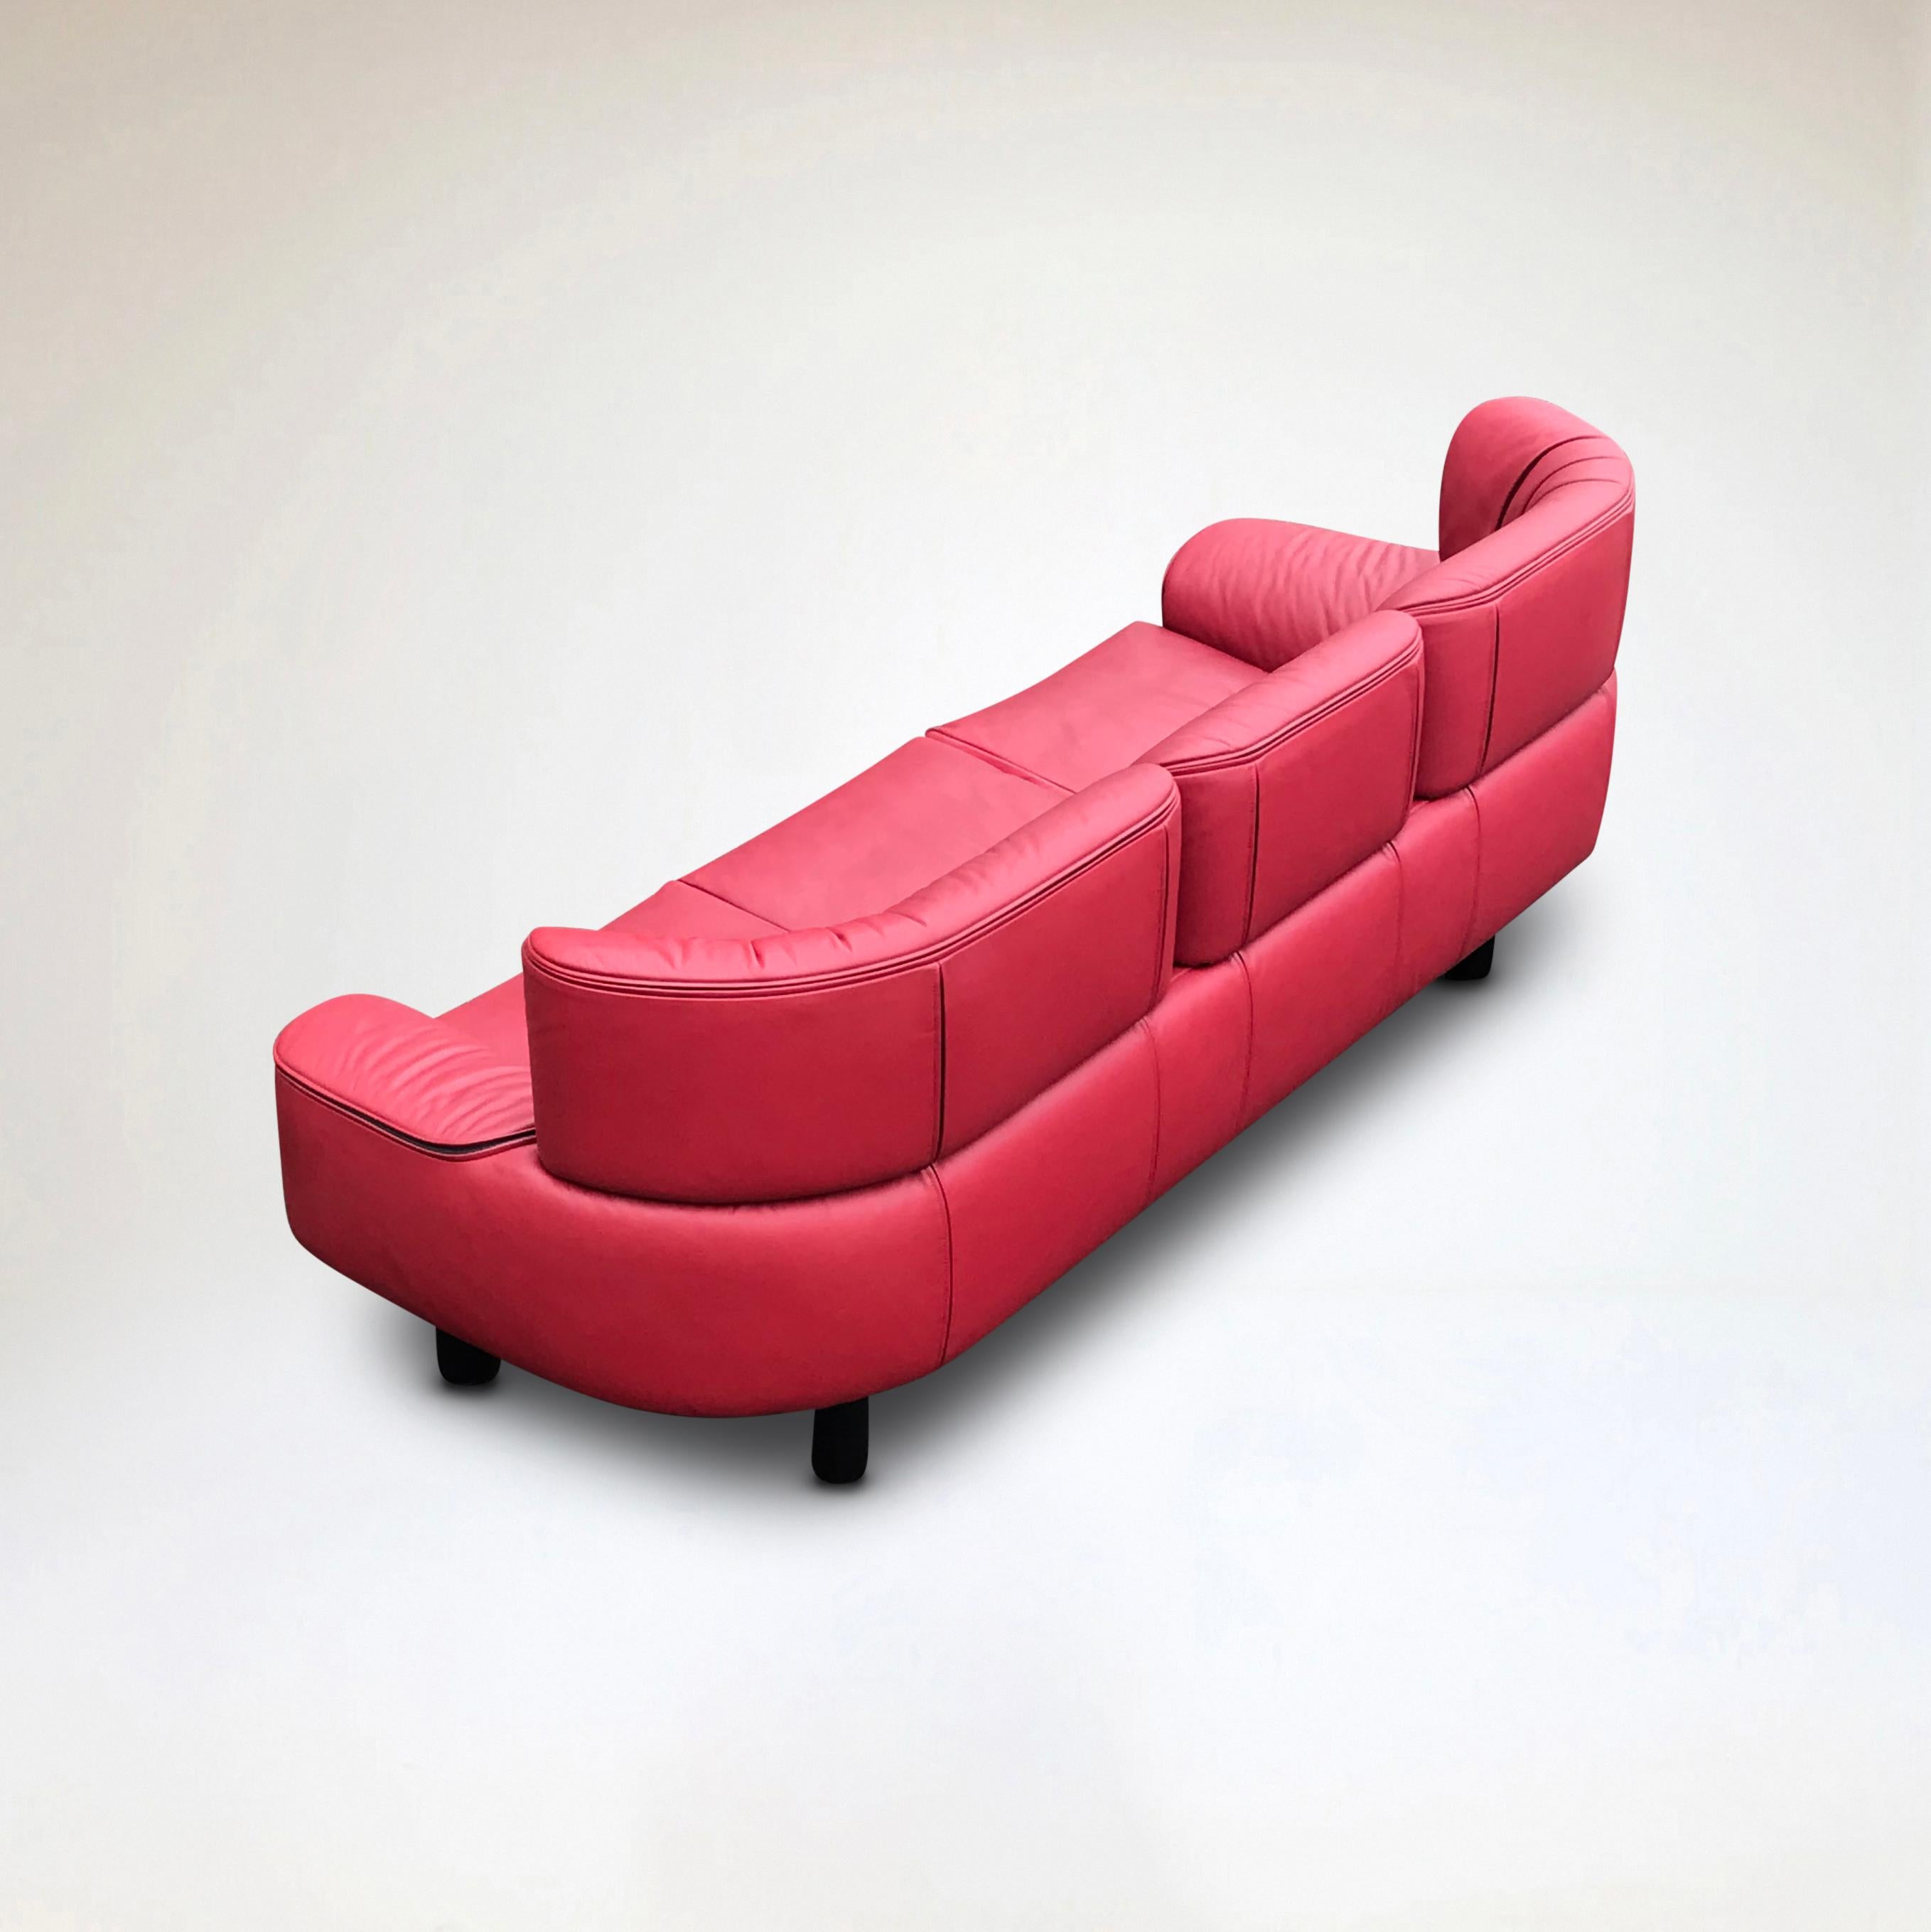 Bull 3-seater red leather sofa by Gianfranco Frattini for Cassina 1987 In Excellent Condition For Sale In Stavenisse, NL